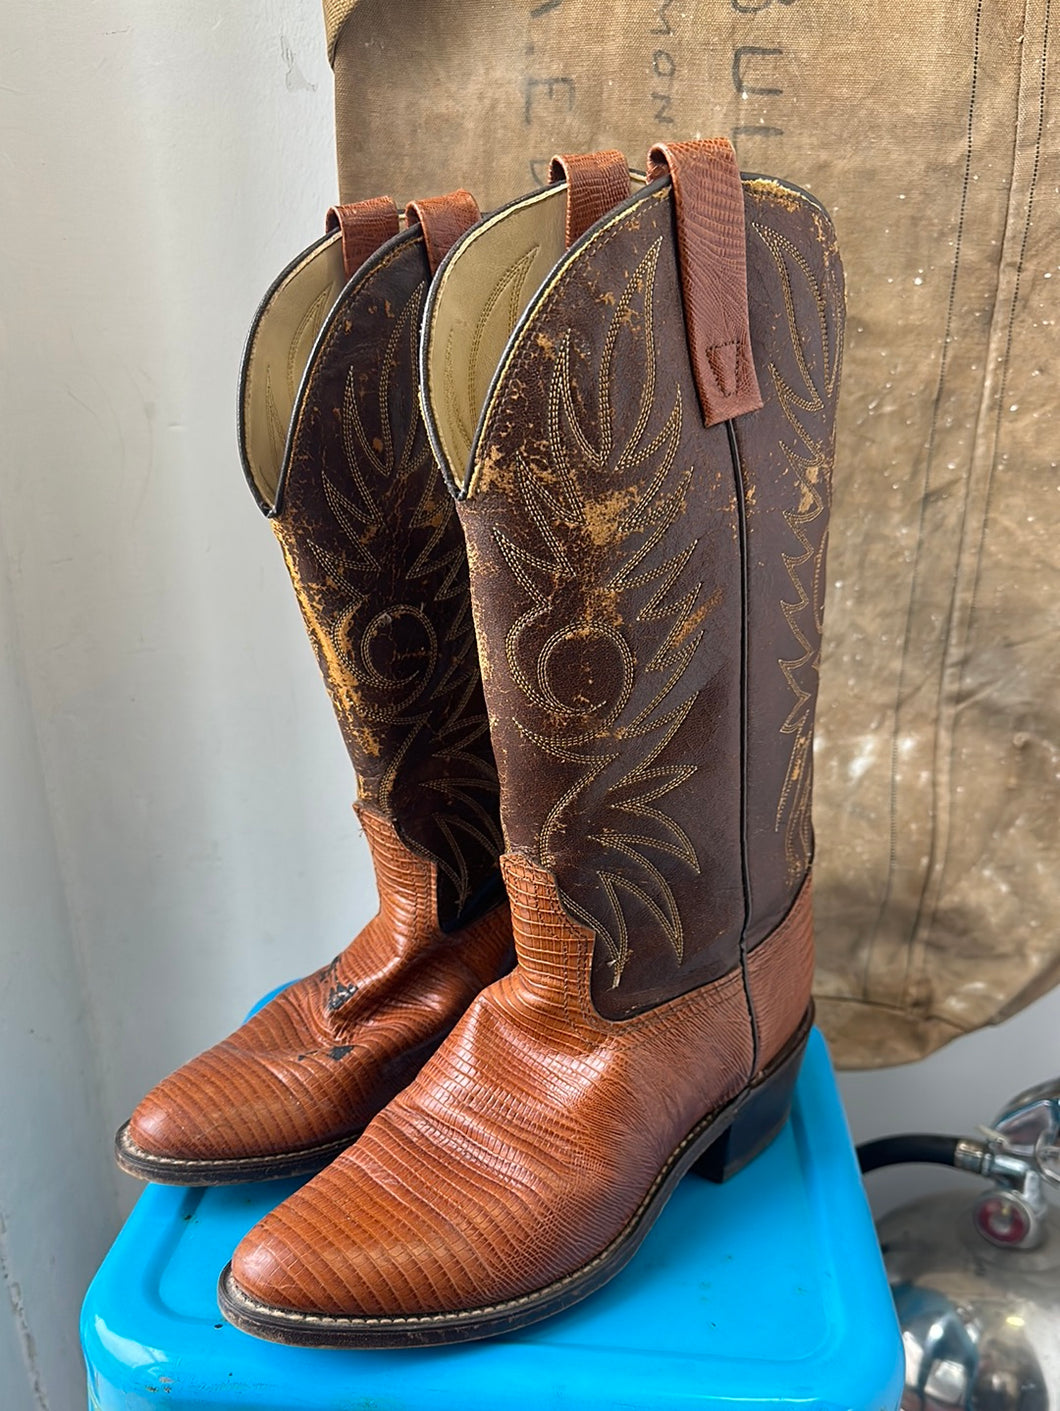 Unbranded Lizard Cowboy Boots - Brown - Size 9 M 10.5 W